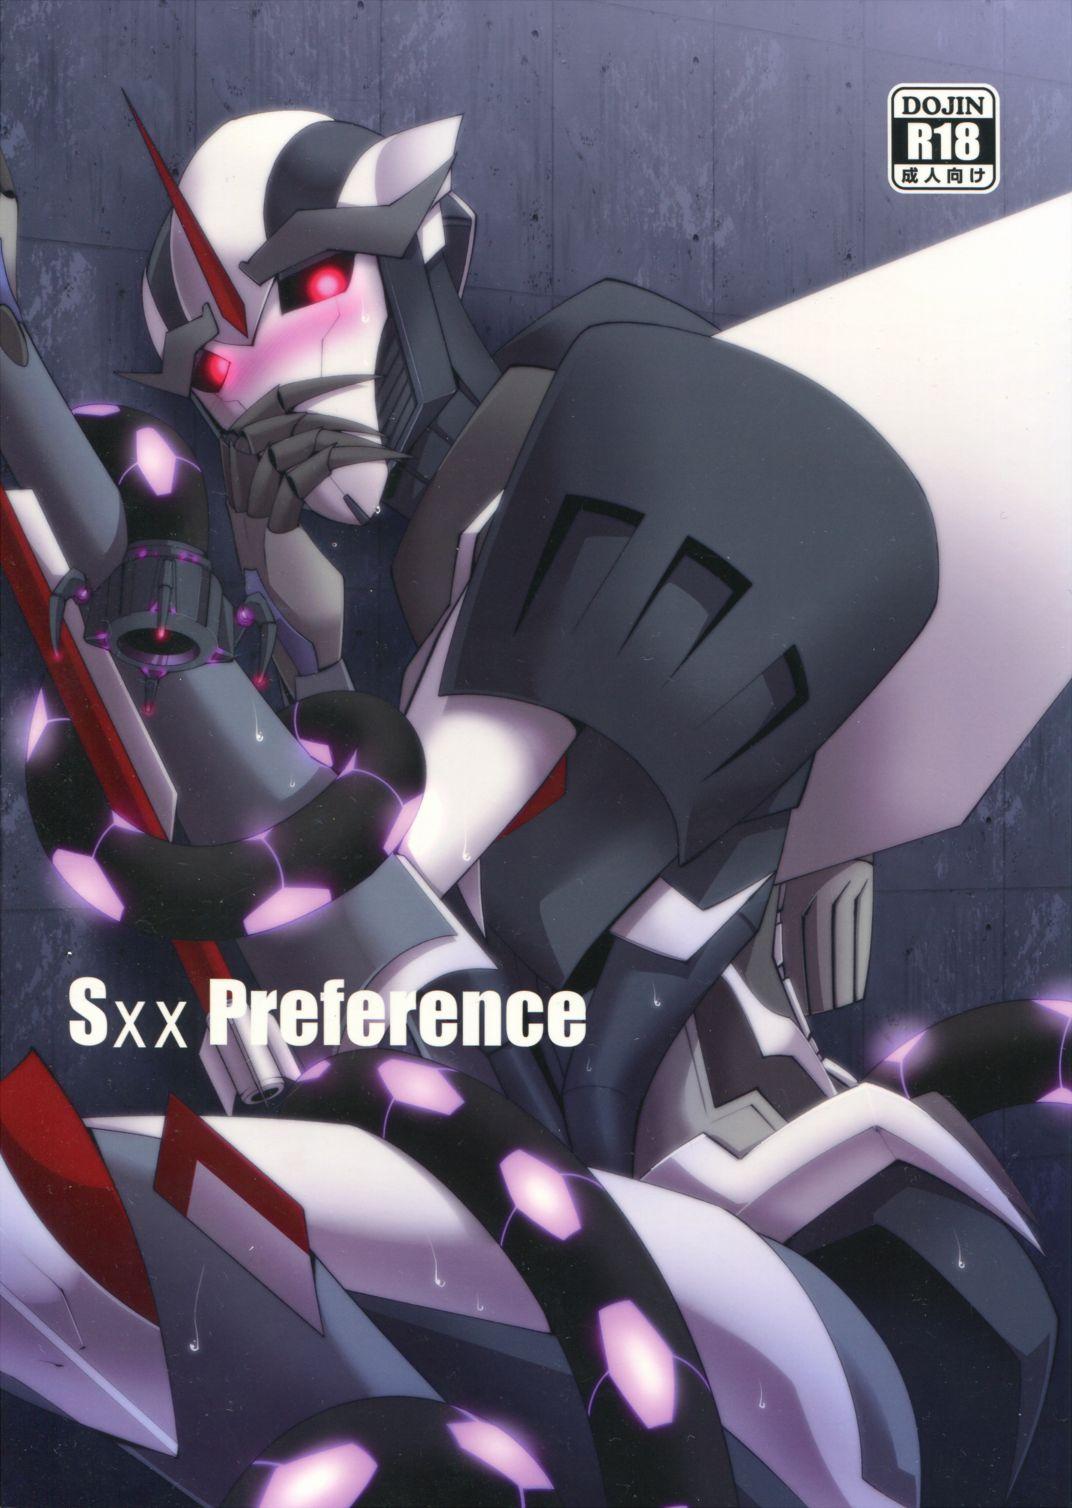 White Girl Sxx Preference - Transformers Toys - Page 1